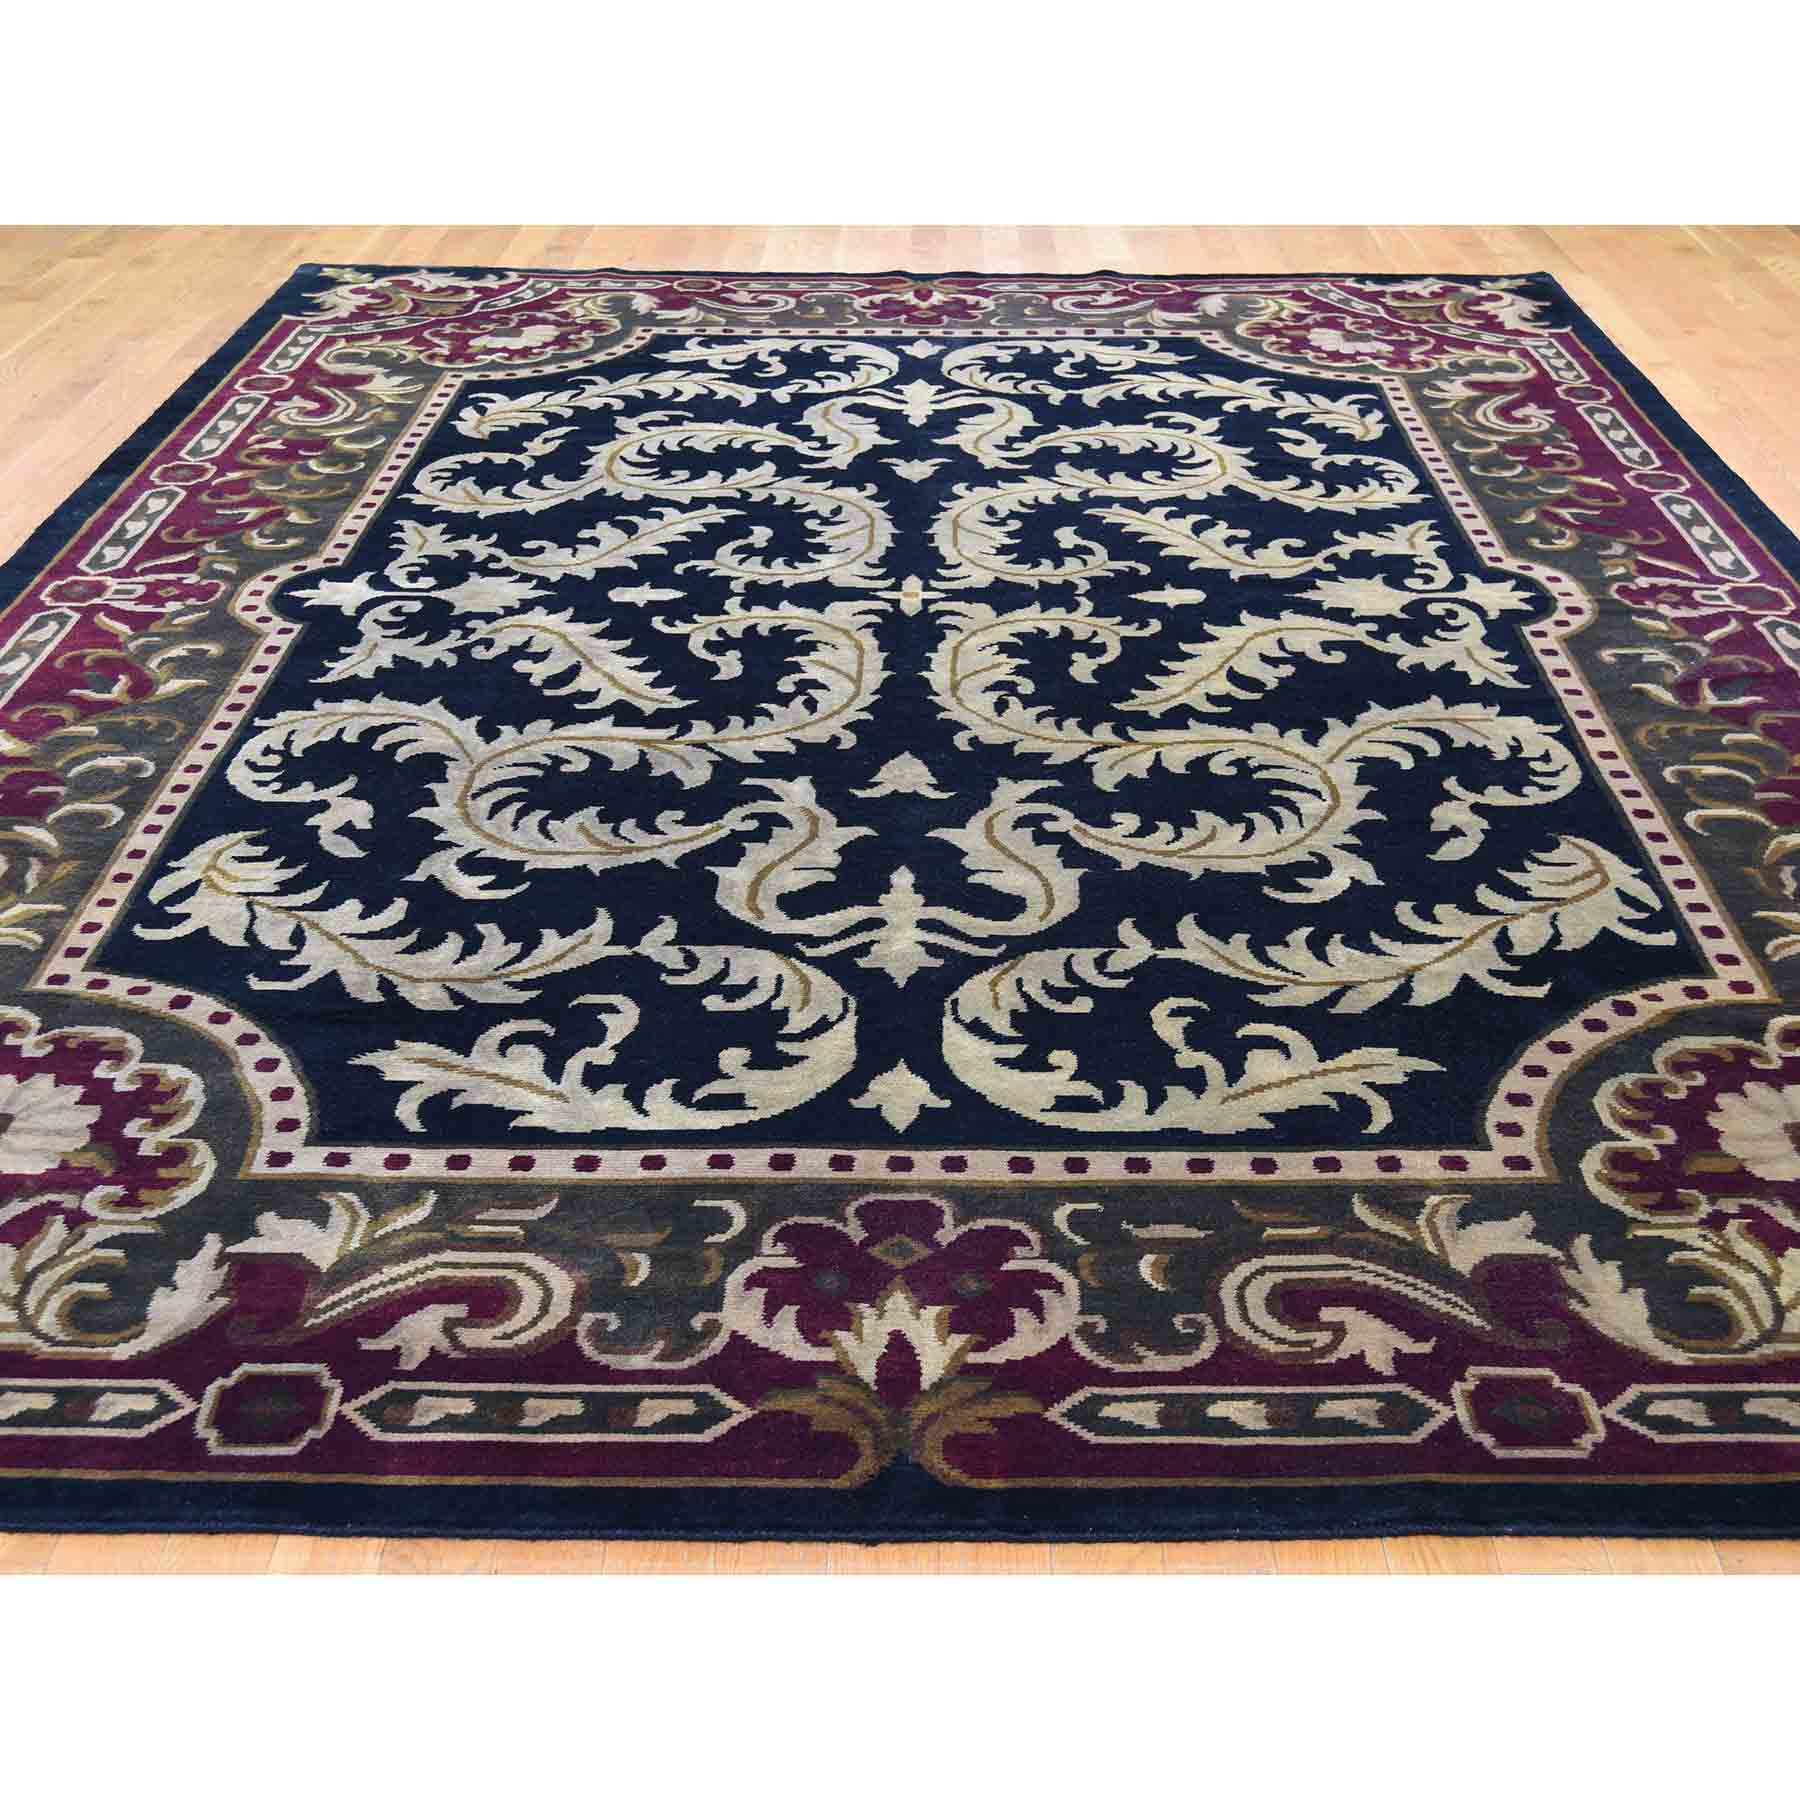 Clearance-Hand-Knotted-Rug-232490